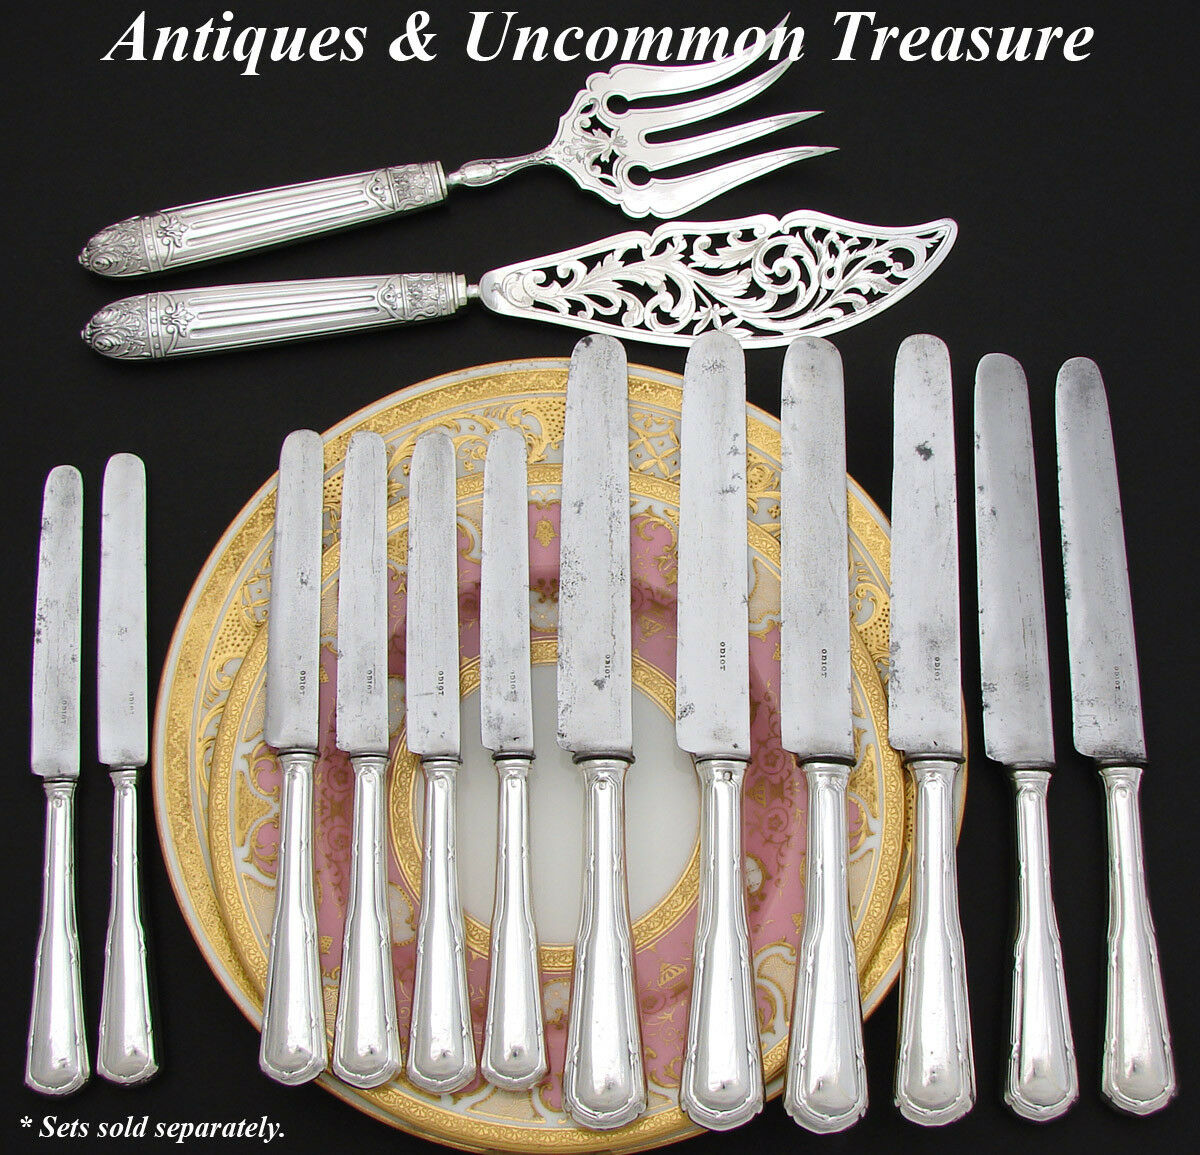 Elegant Antique French ODIOT Sterling Silver 12pc Table Knife Set, 2pc for SIX